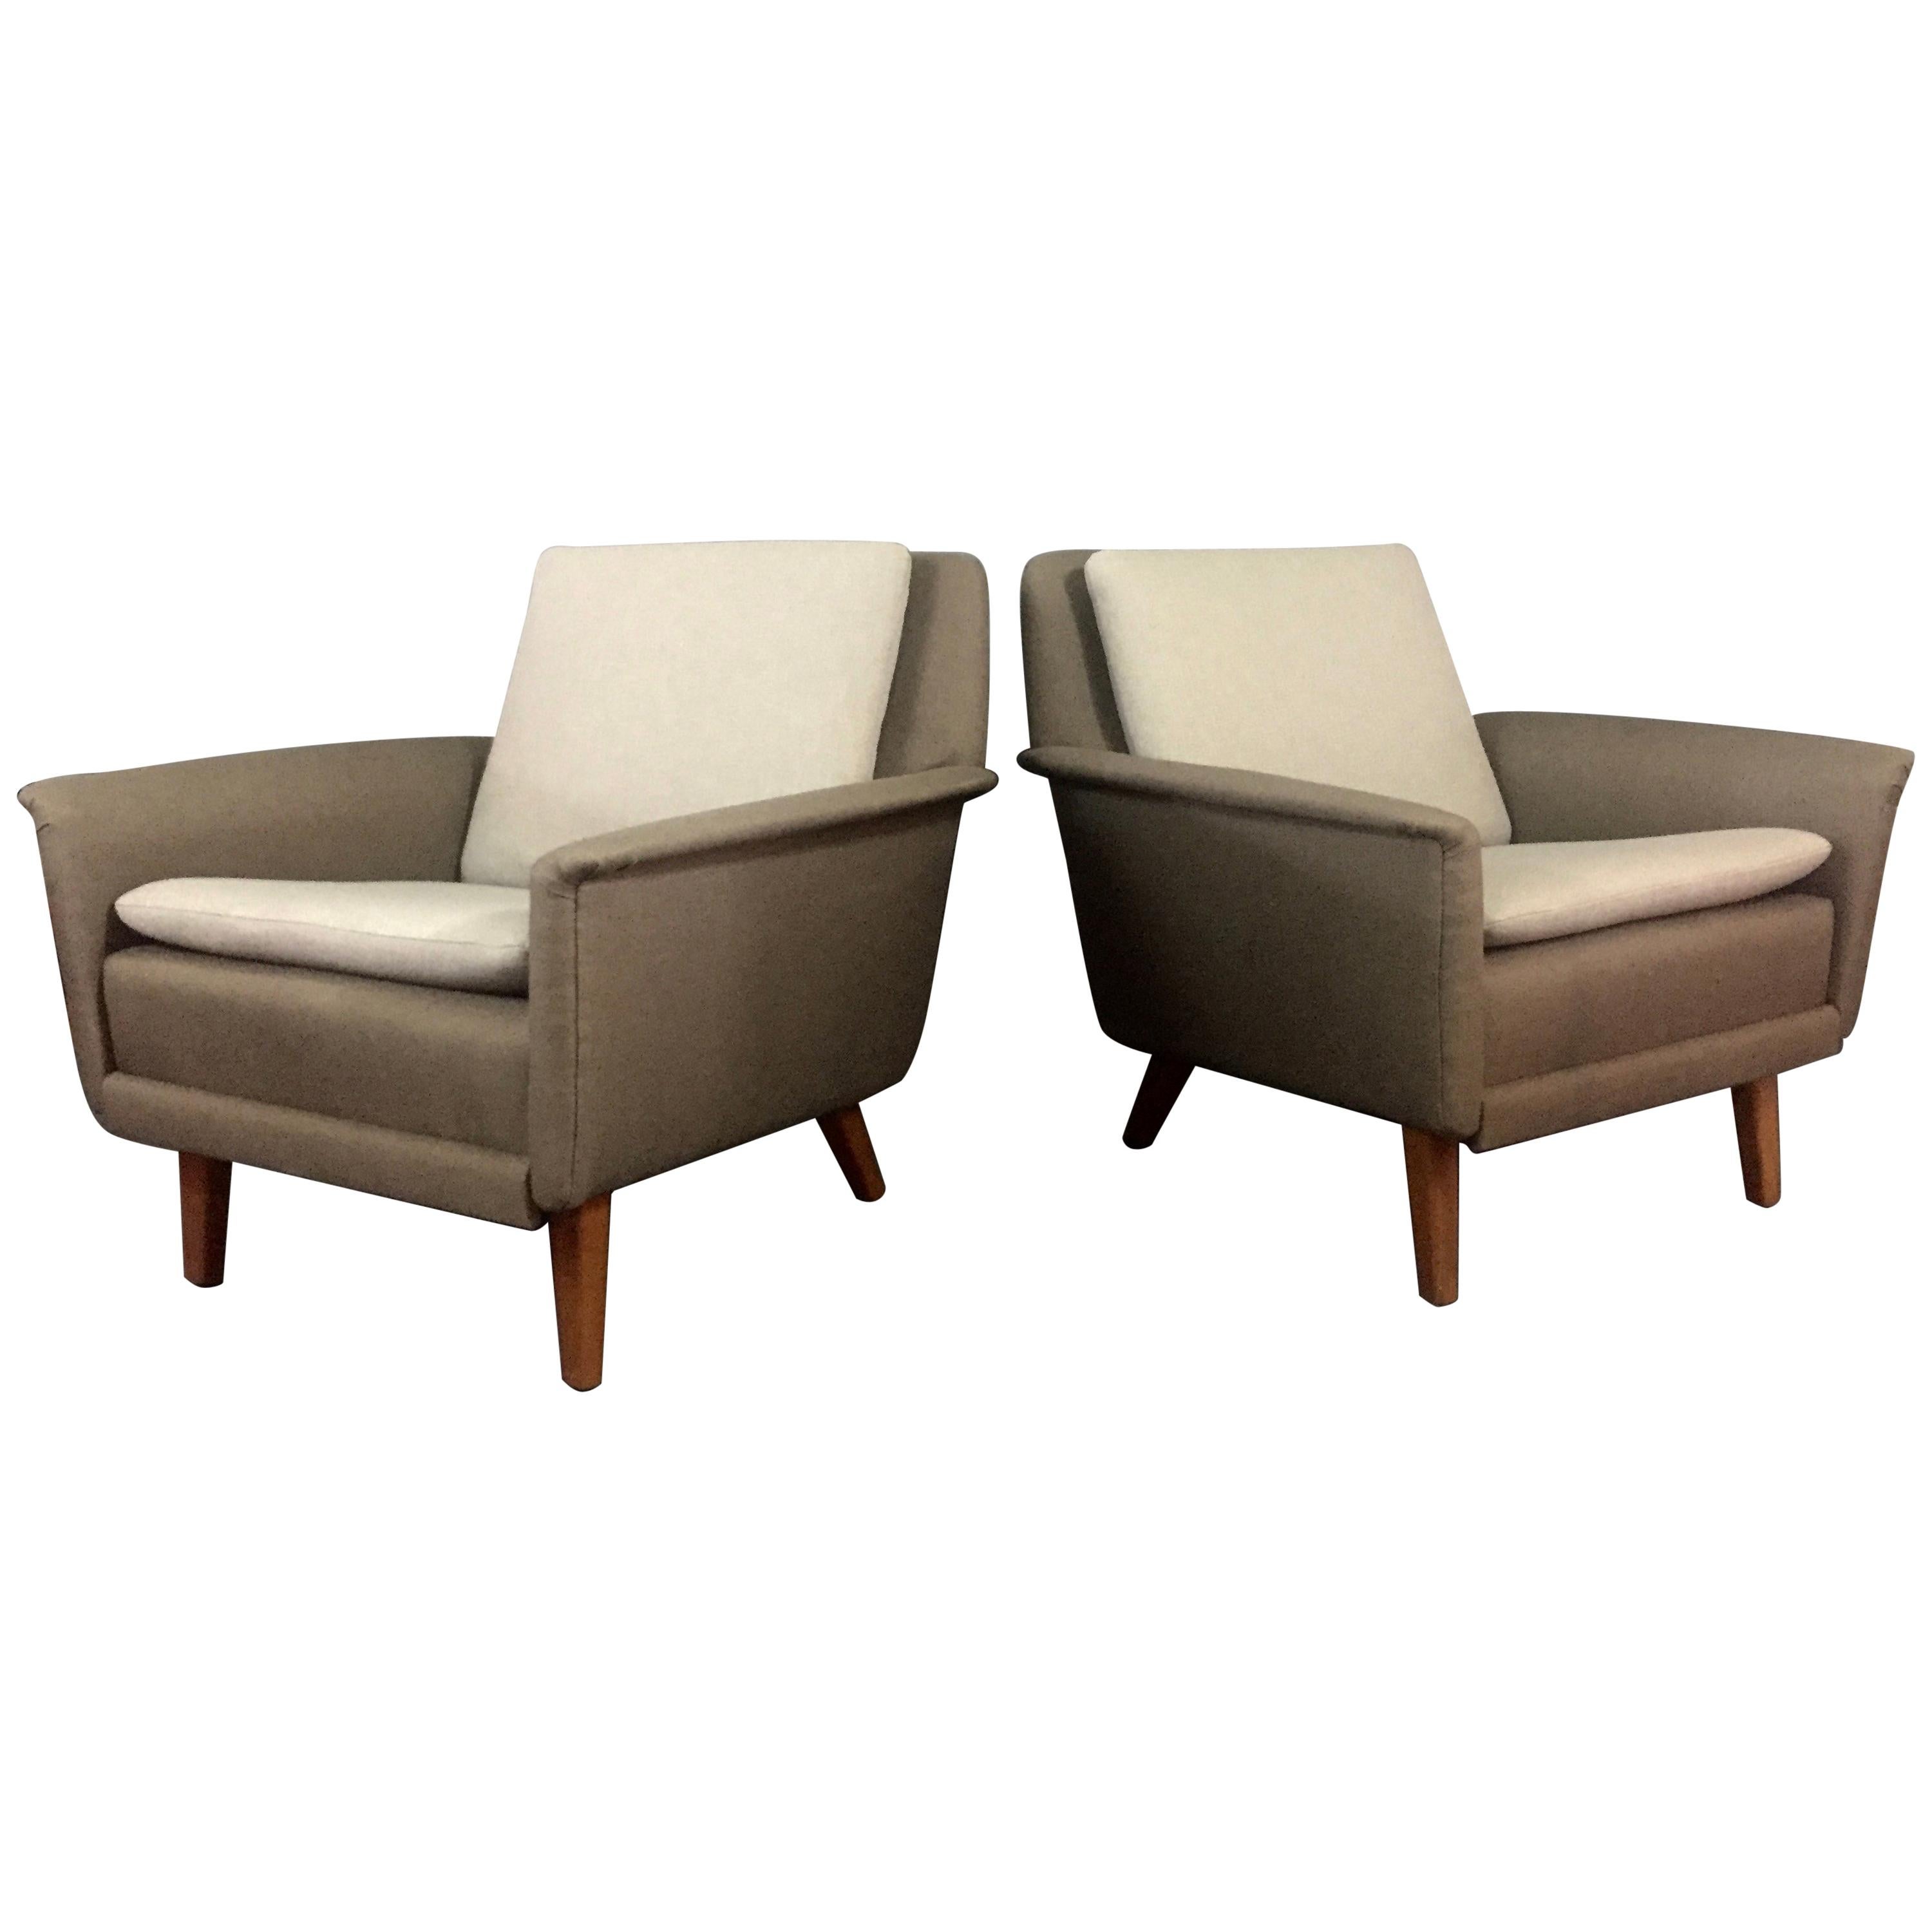 Pair of Folke Ohlsson Lounge Chairs, Denmark, 1960s For Sale